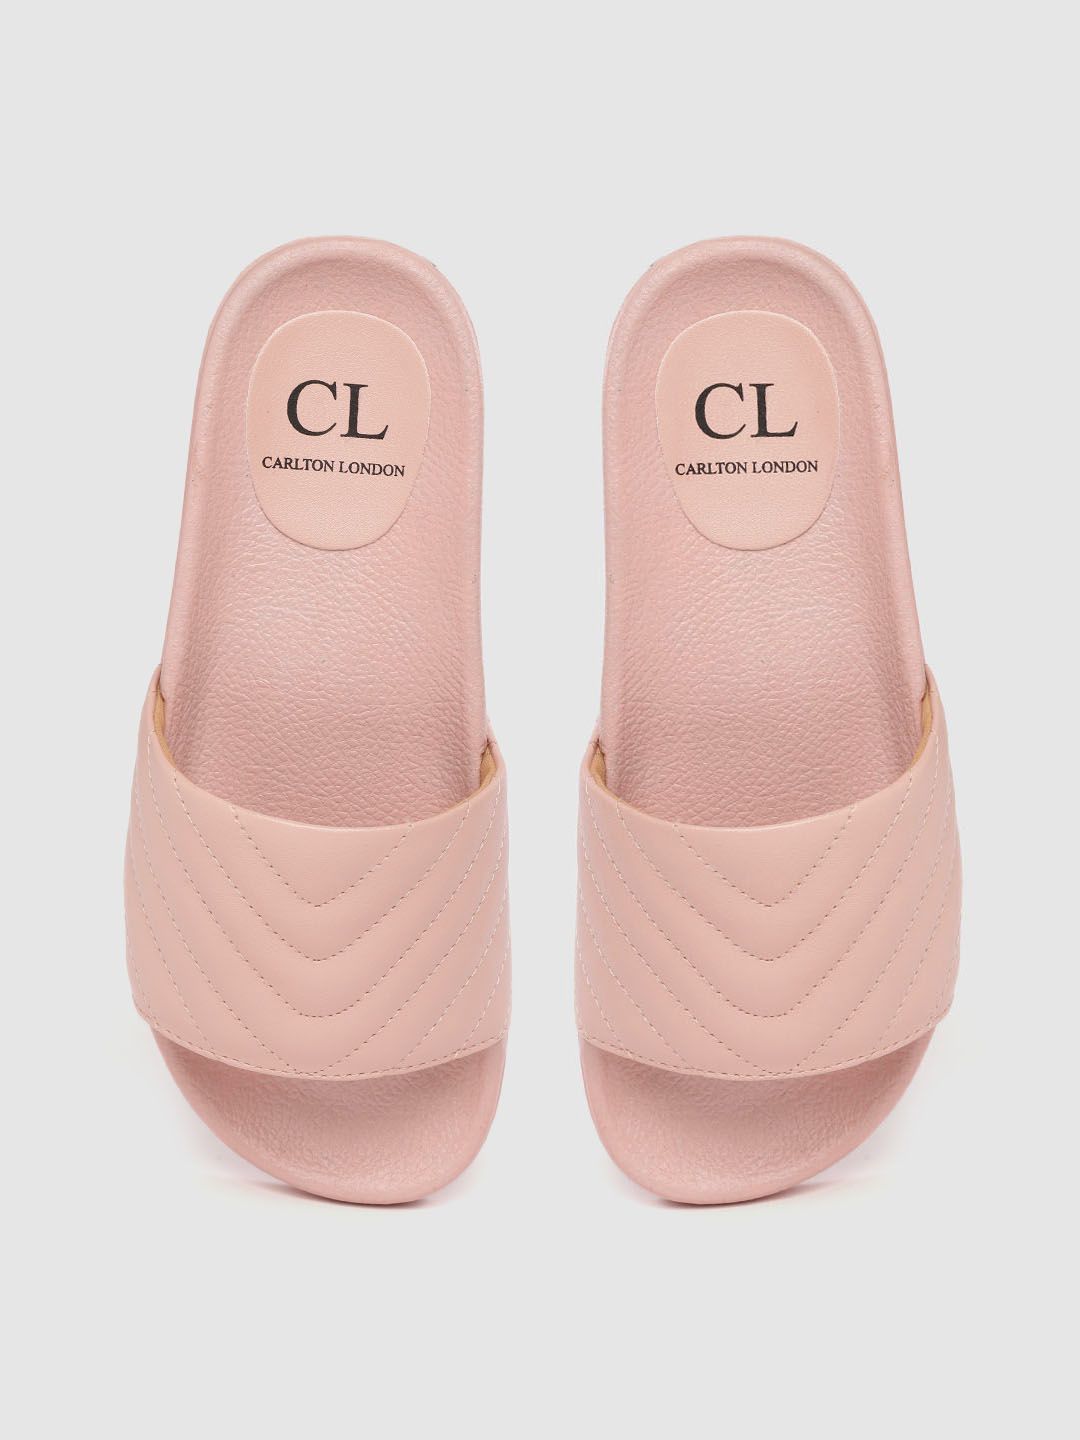 Carlton London Women Peach-Coloured Quilted Sliders Price in India